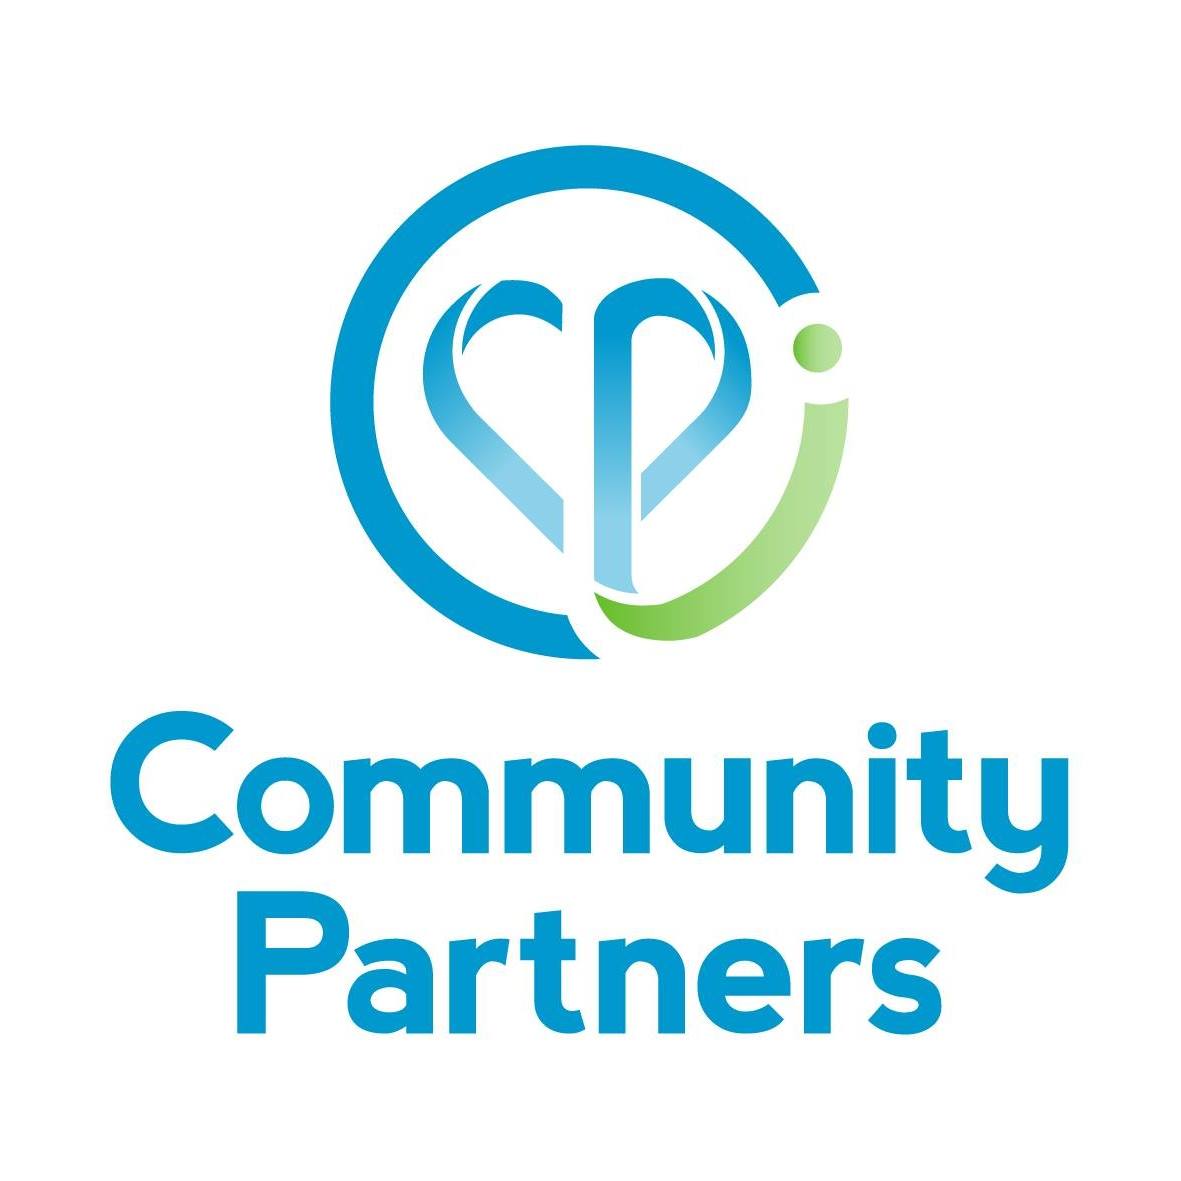 Community Partners Integrated